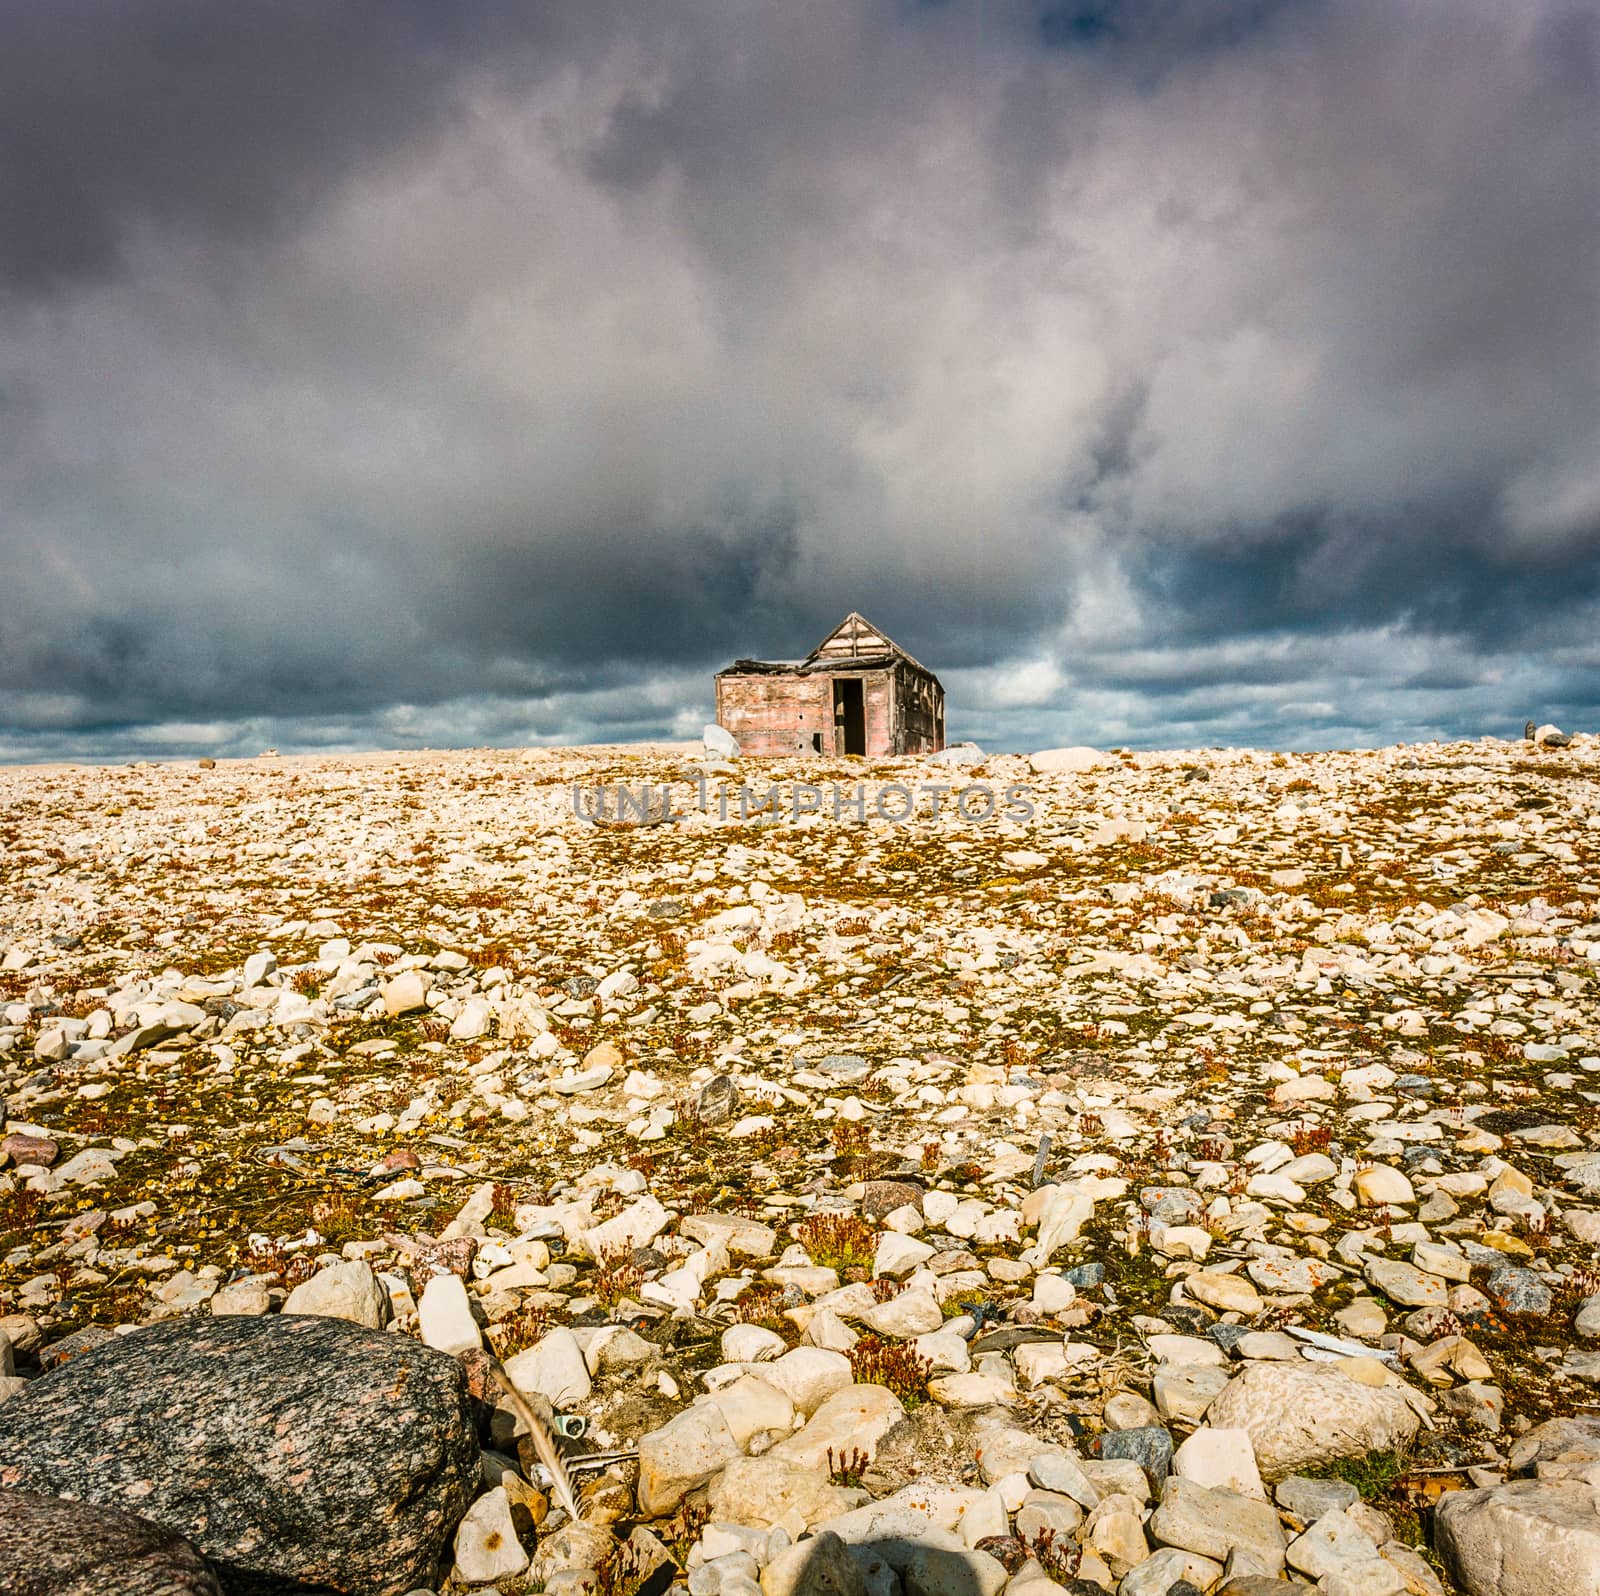 A bleached, hunter's cabin sits under a powerful, cloudy Arctic sky.